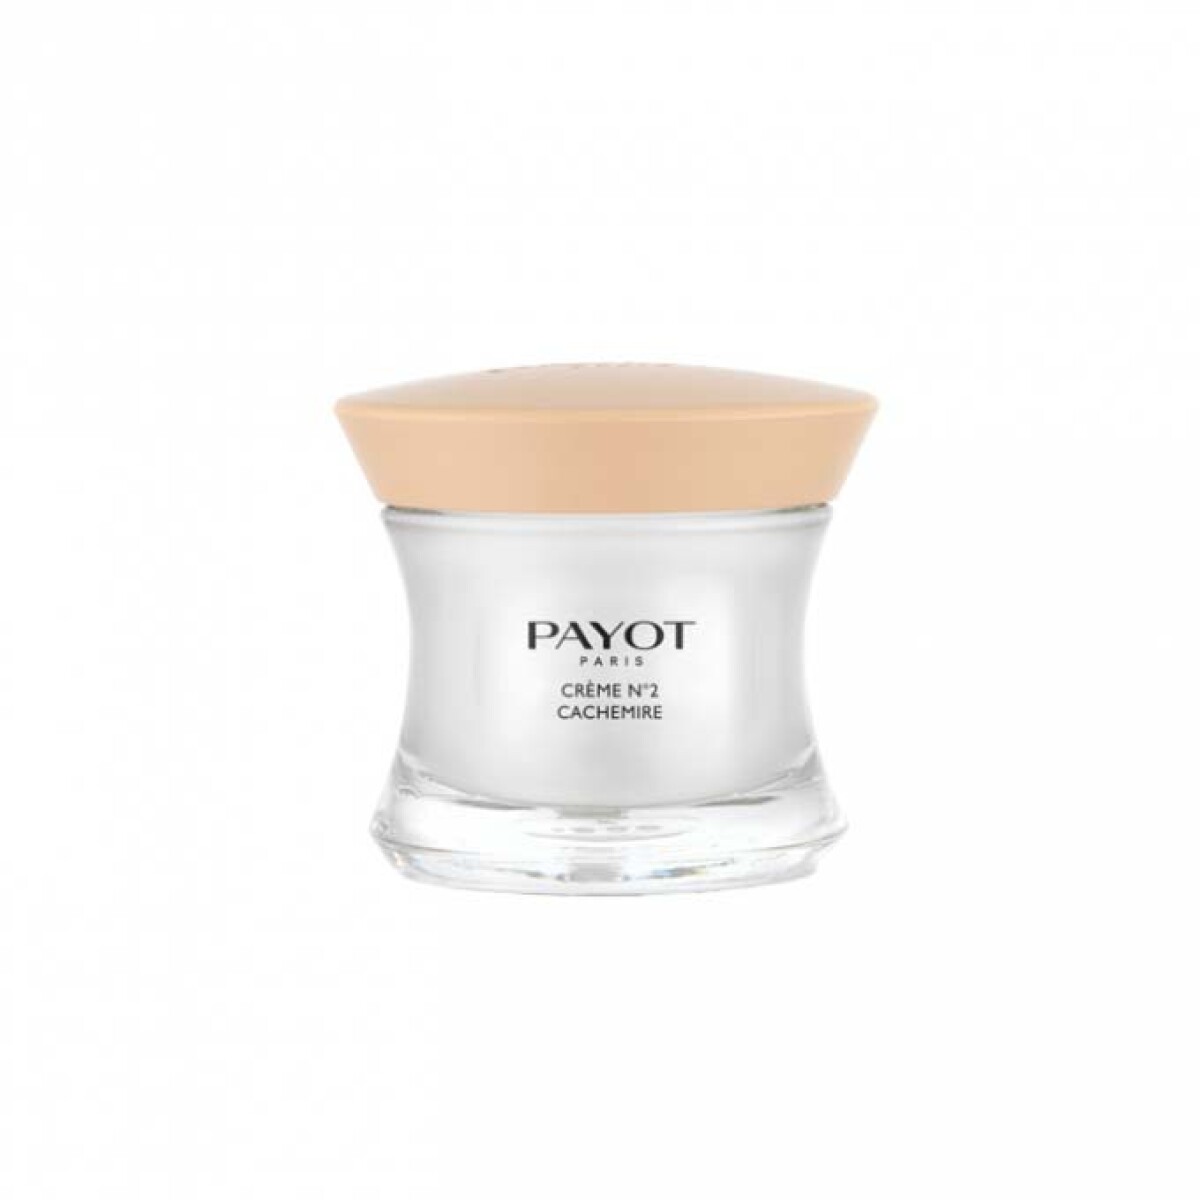 Payot Creme N?2 Cachemire 